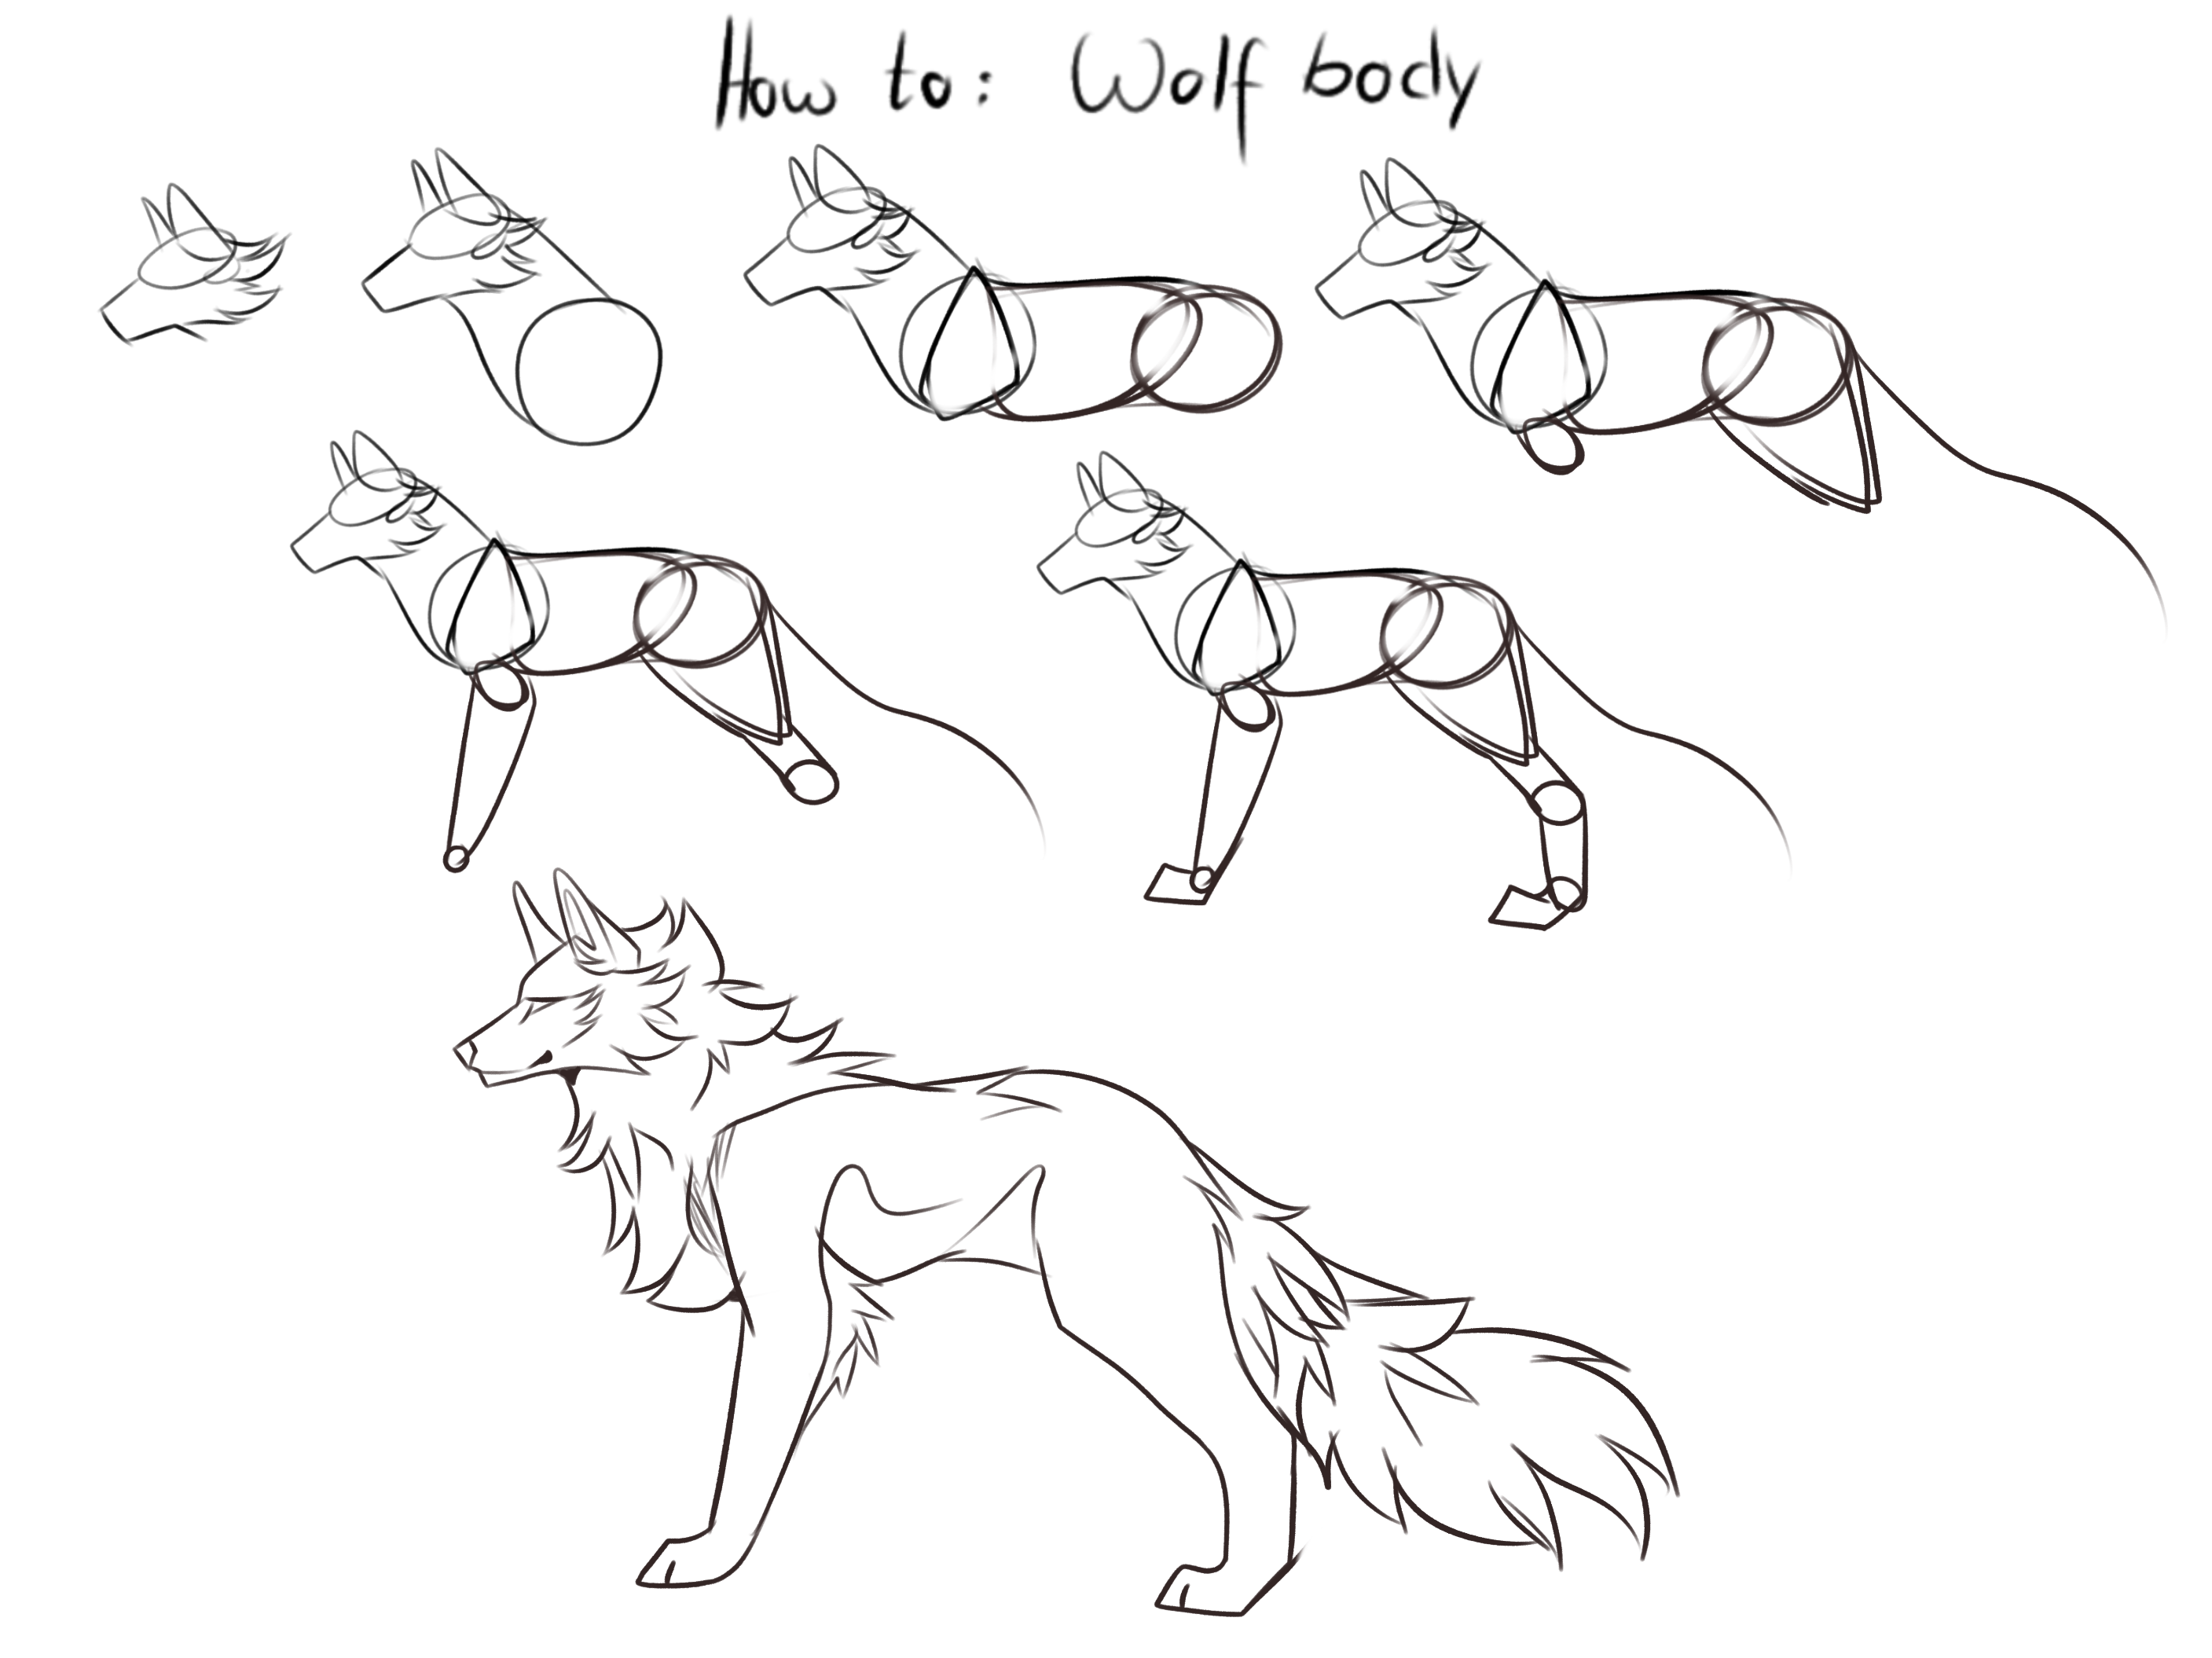 How to draw a wolf Body by Timelessnova on DeviantArt